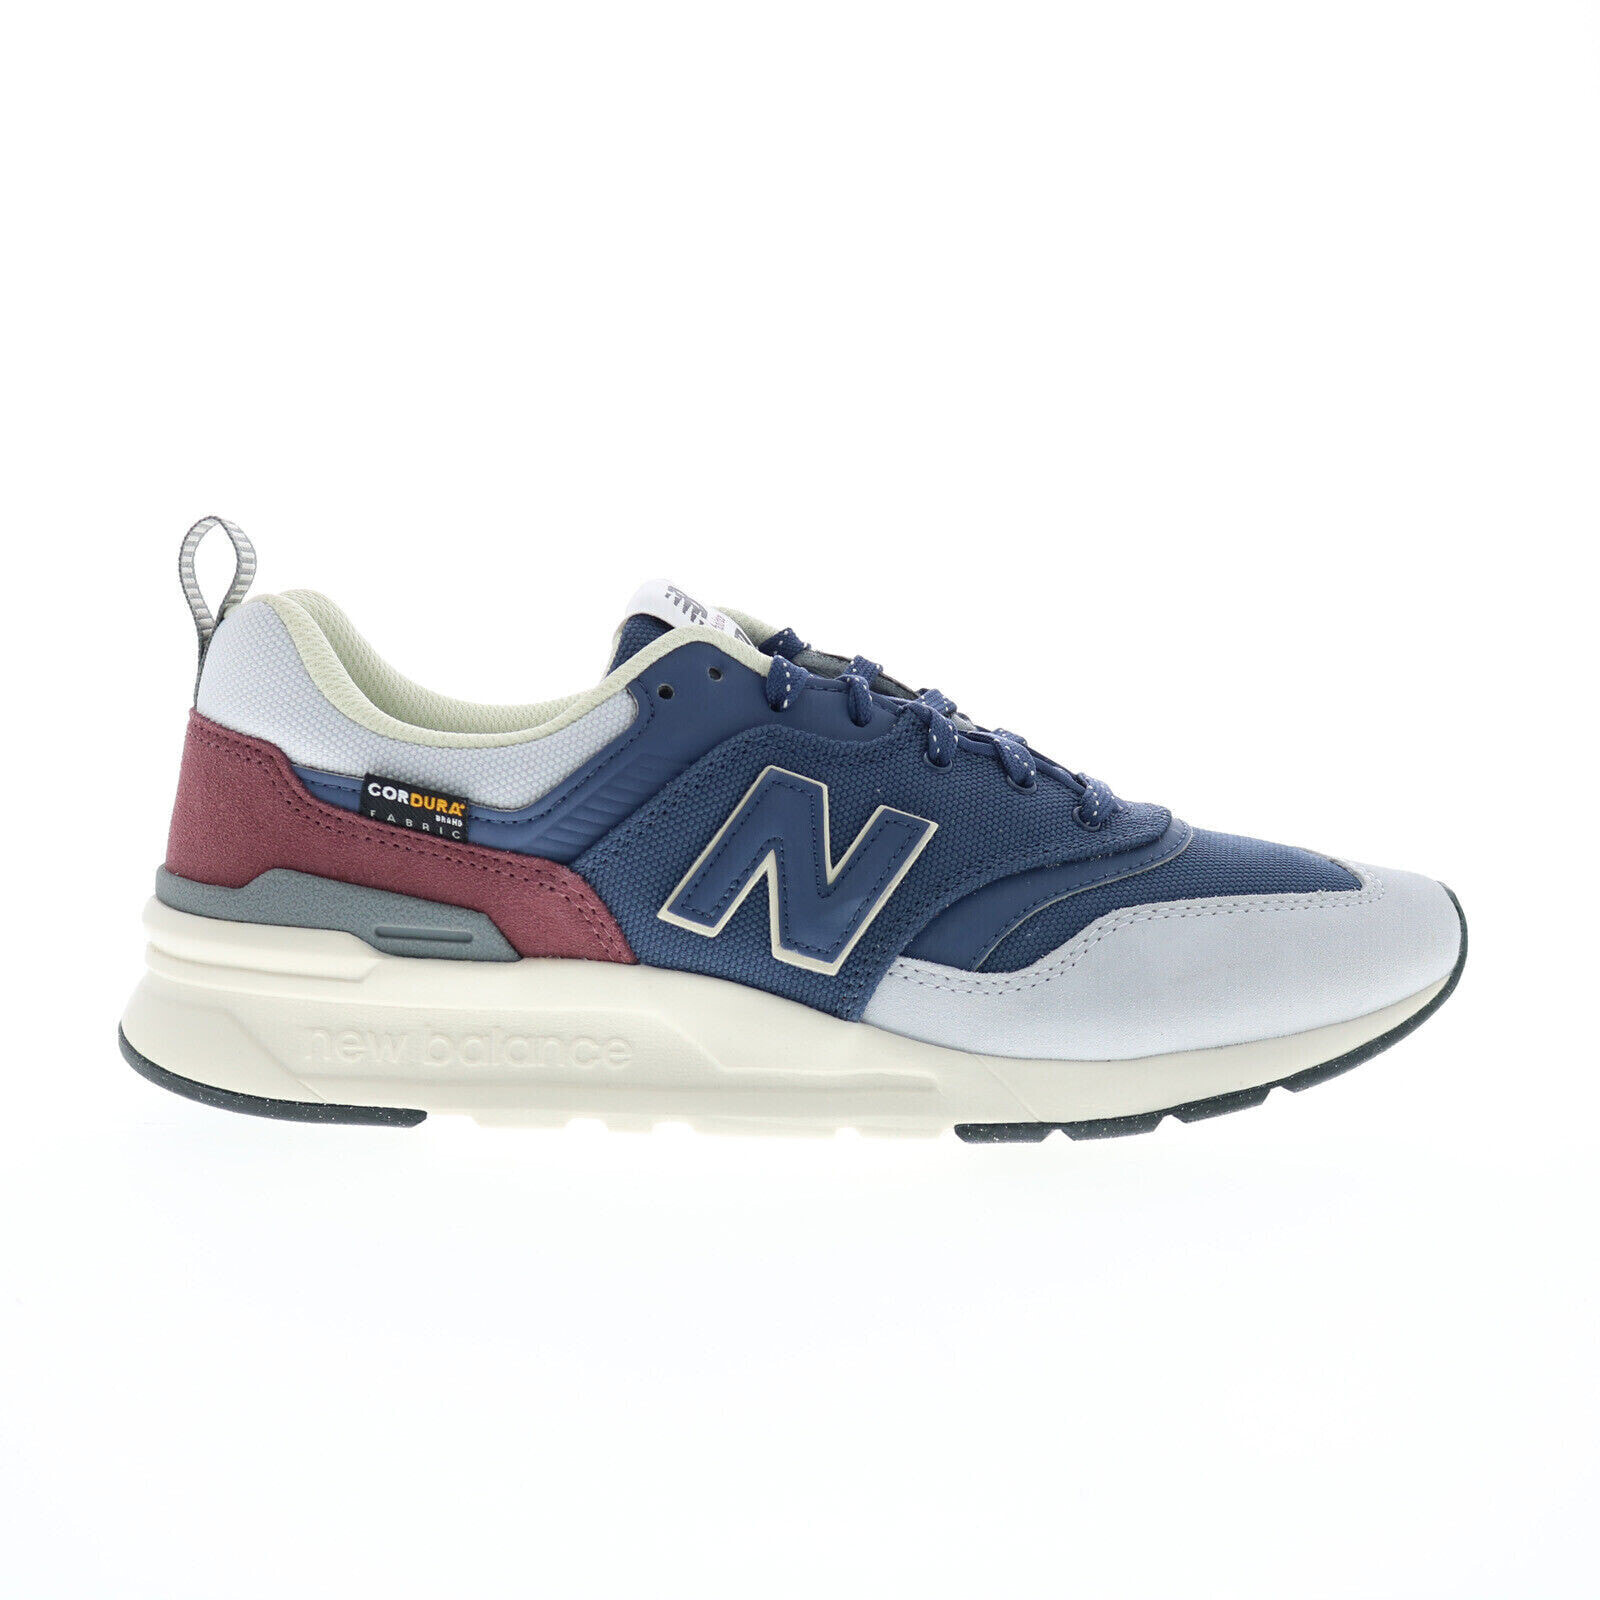 New Balance 997H CM997HWK Mens Blue Suede Lace Up Lifestyle Sneakers Shoes 9